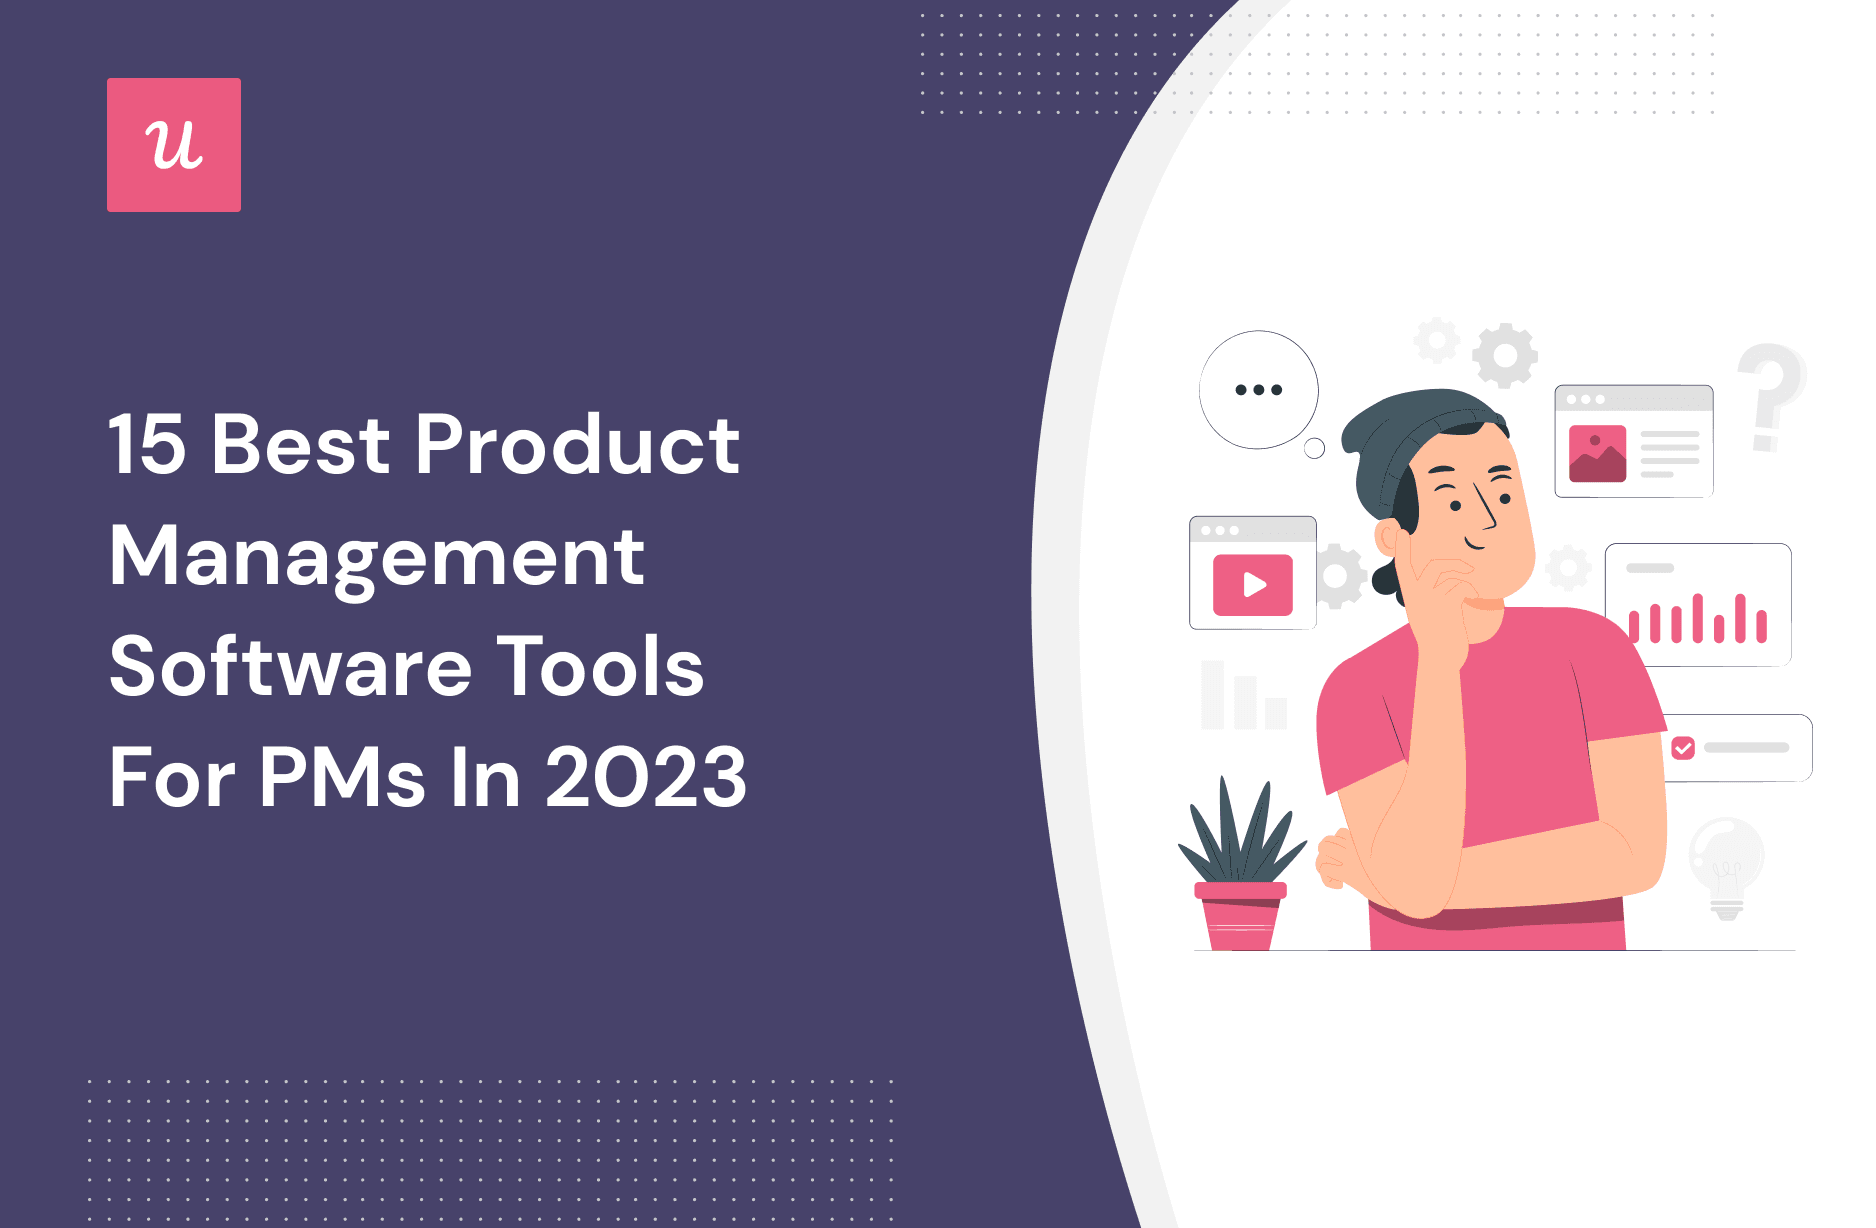 15 Best Product Management Software Tools for PMs in 2023 cover